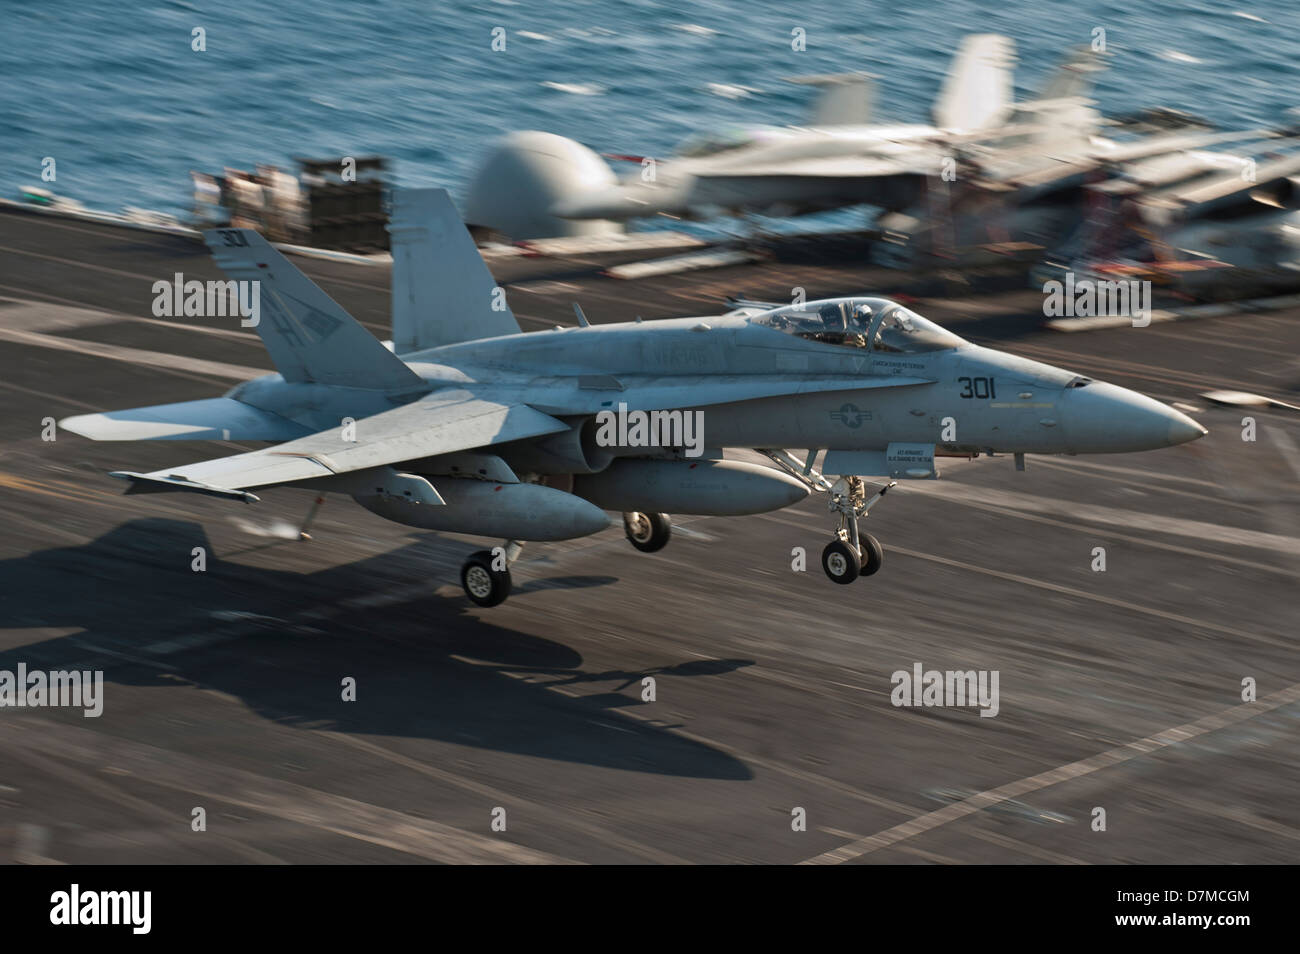 A US Navy F/A-18C Super Hornet lands on the flight deck of the aircraft carrier USS Nimitz May 8, 2013 underway in the Western Pacific. Stock Photo